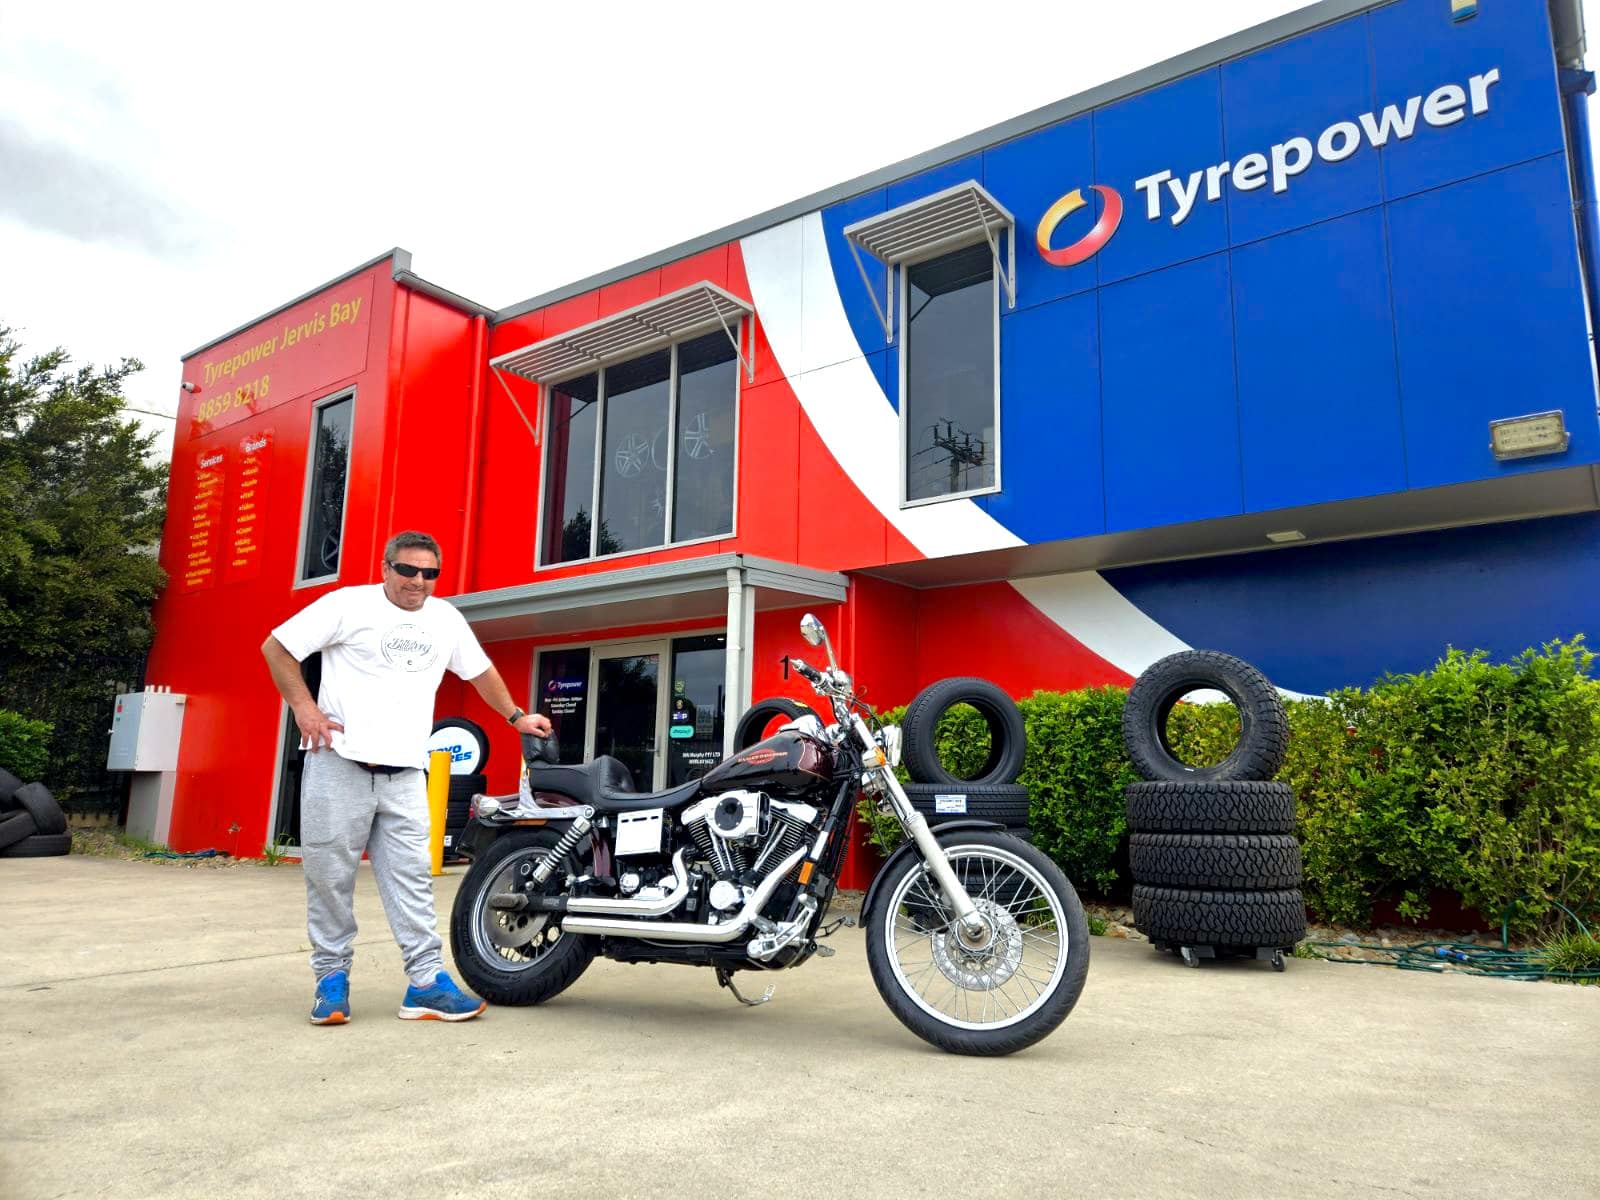 Sandy & his motorbike outside of Tyrepower Jervis Bay